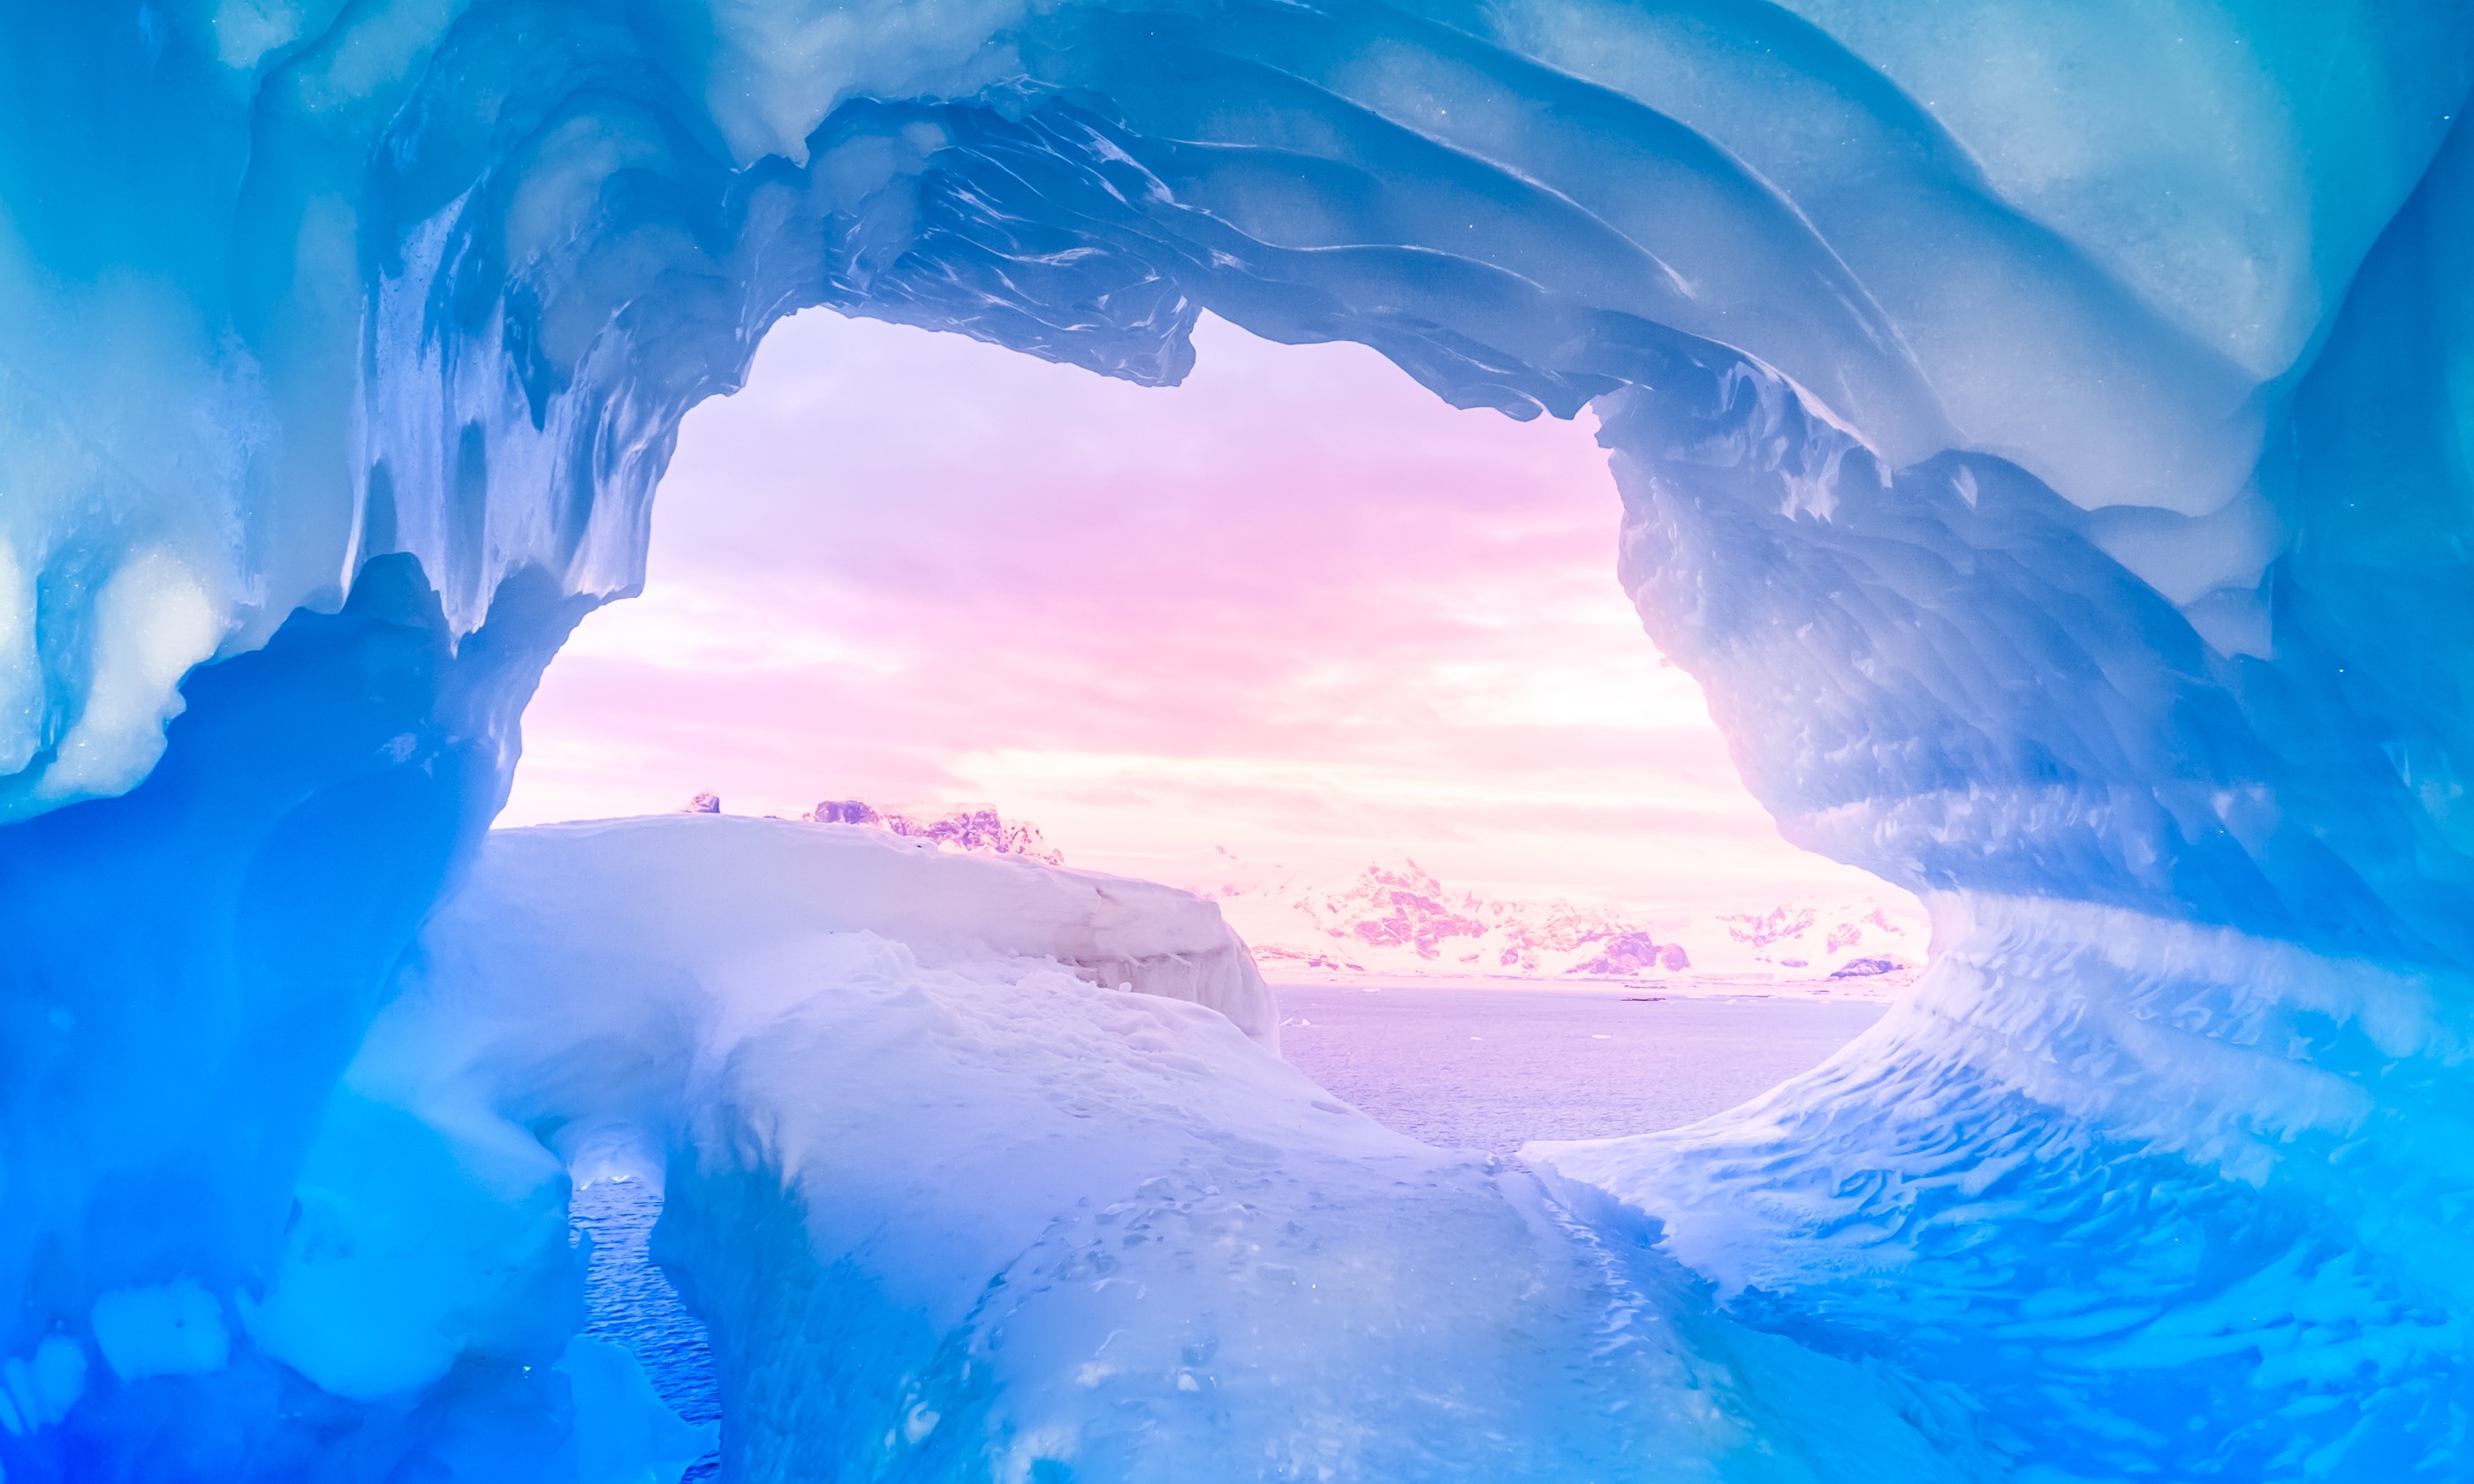 Ice cave at sunset (Shutterstock.com)